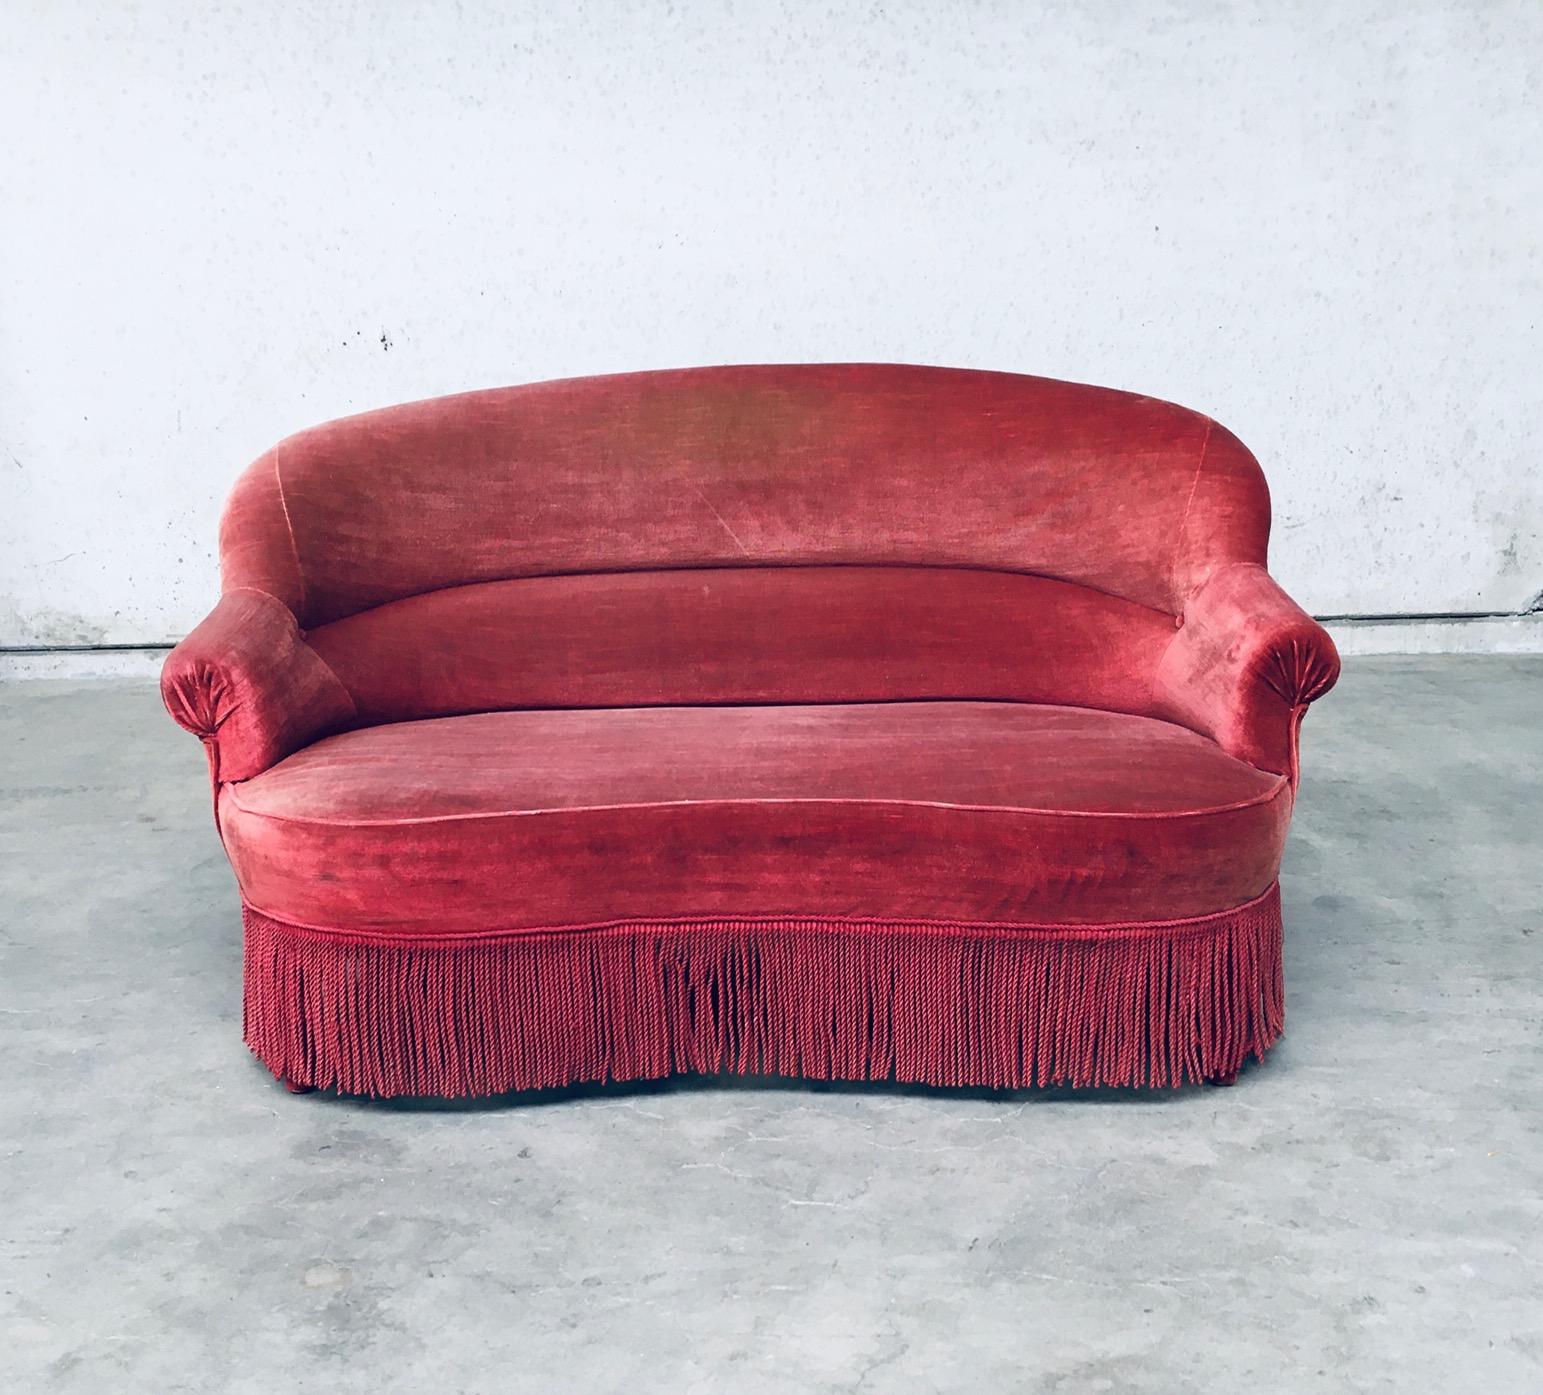 Mid-20th Century Hollywood Regency Style Red Pink Velvet Love Seat Sofa with Fringe, 1950's